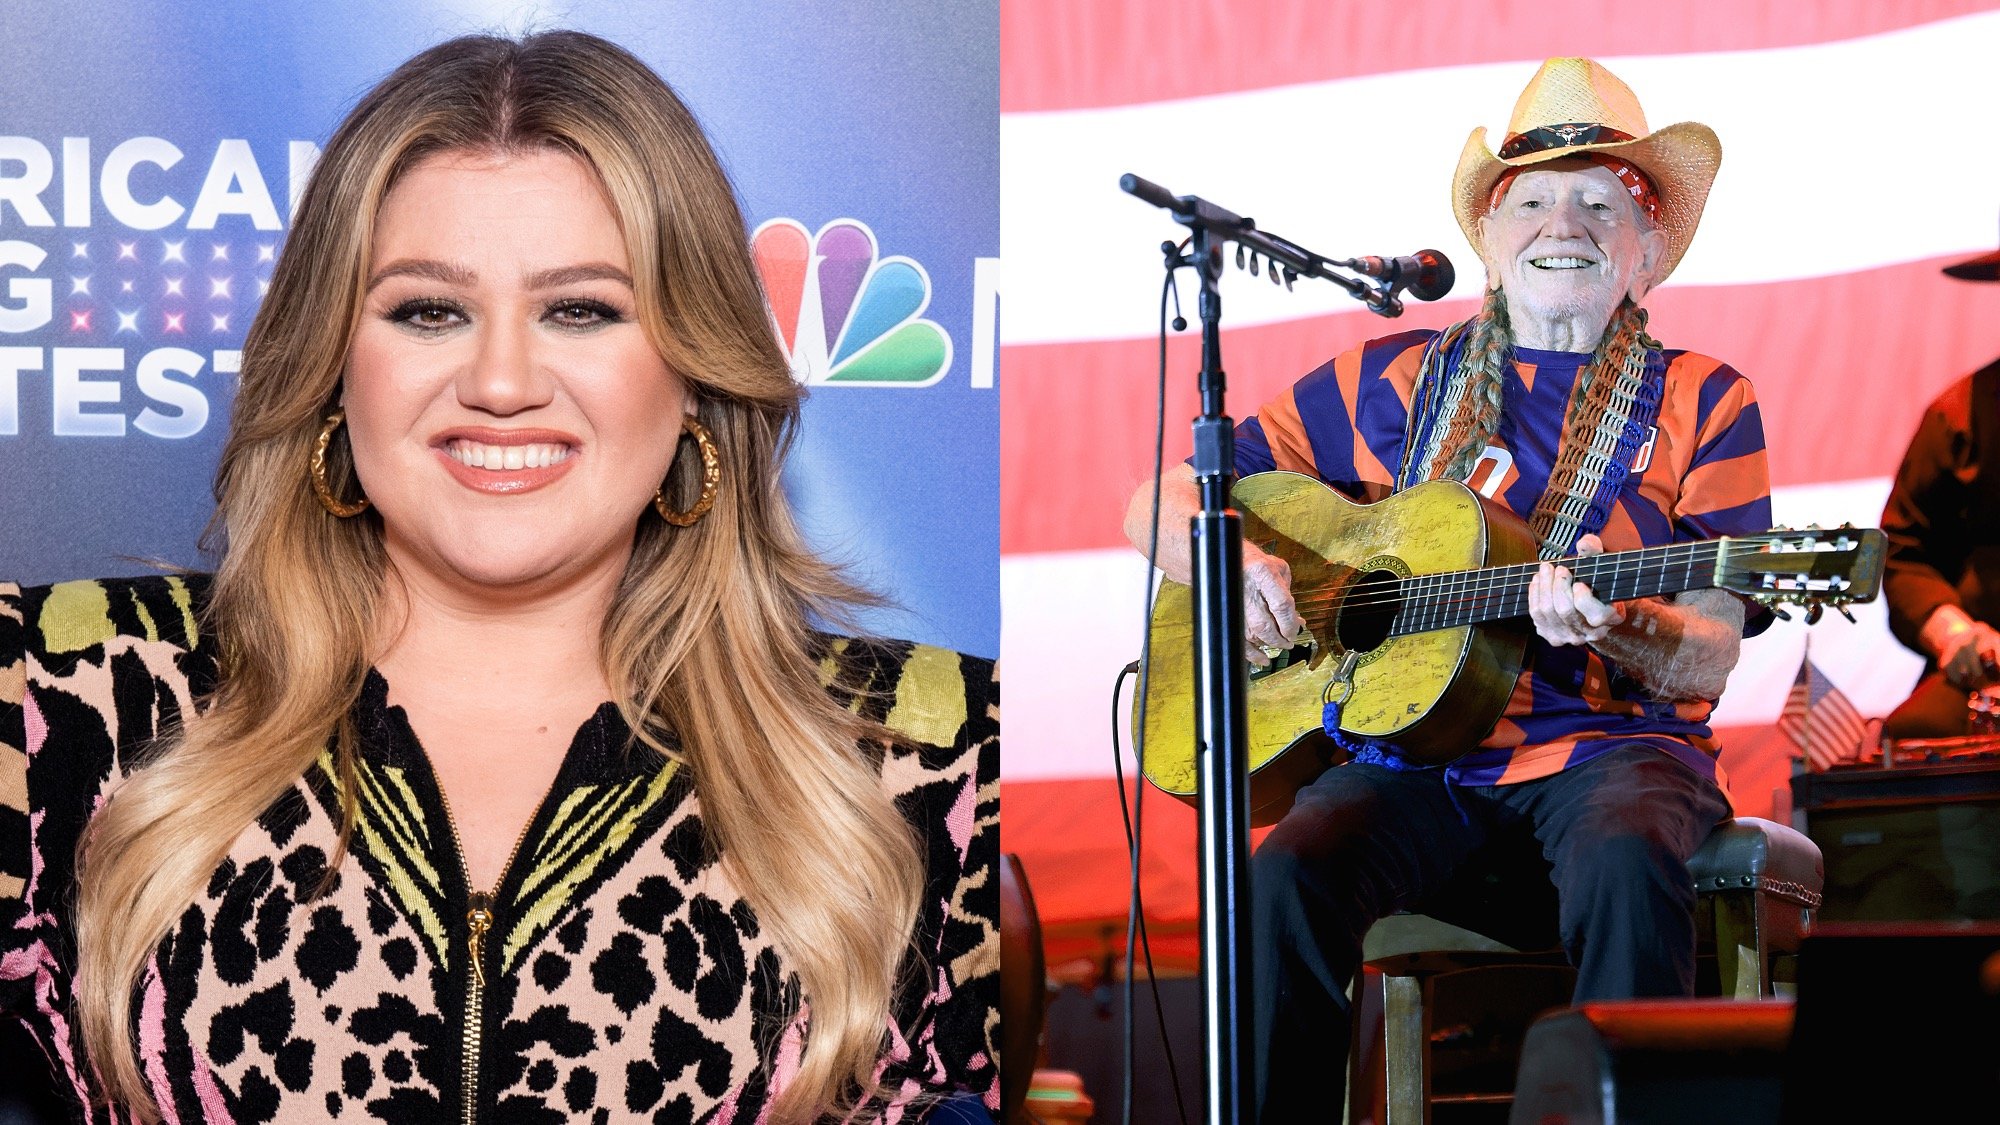 (L) Kelly Clarkson attends NBC's "American Song Contest" week five red carpet at Universal Studios Hollywood on April 18, 2022. (R) Willie Nelson performs in concert during Willie Nelson's 4th of July Picnic at Q2 Stadium on July 04, 2022.